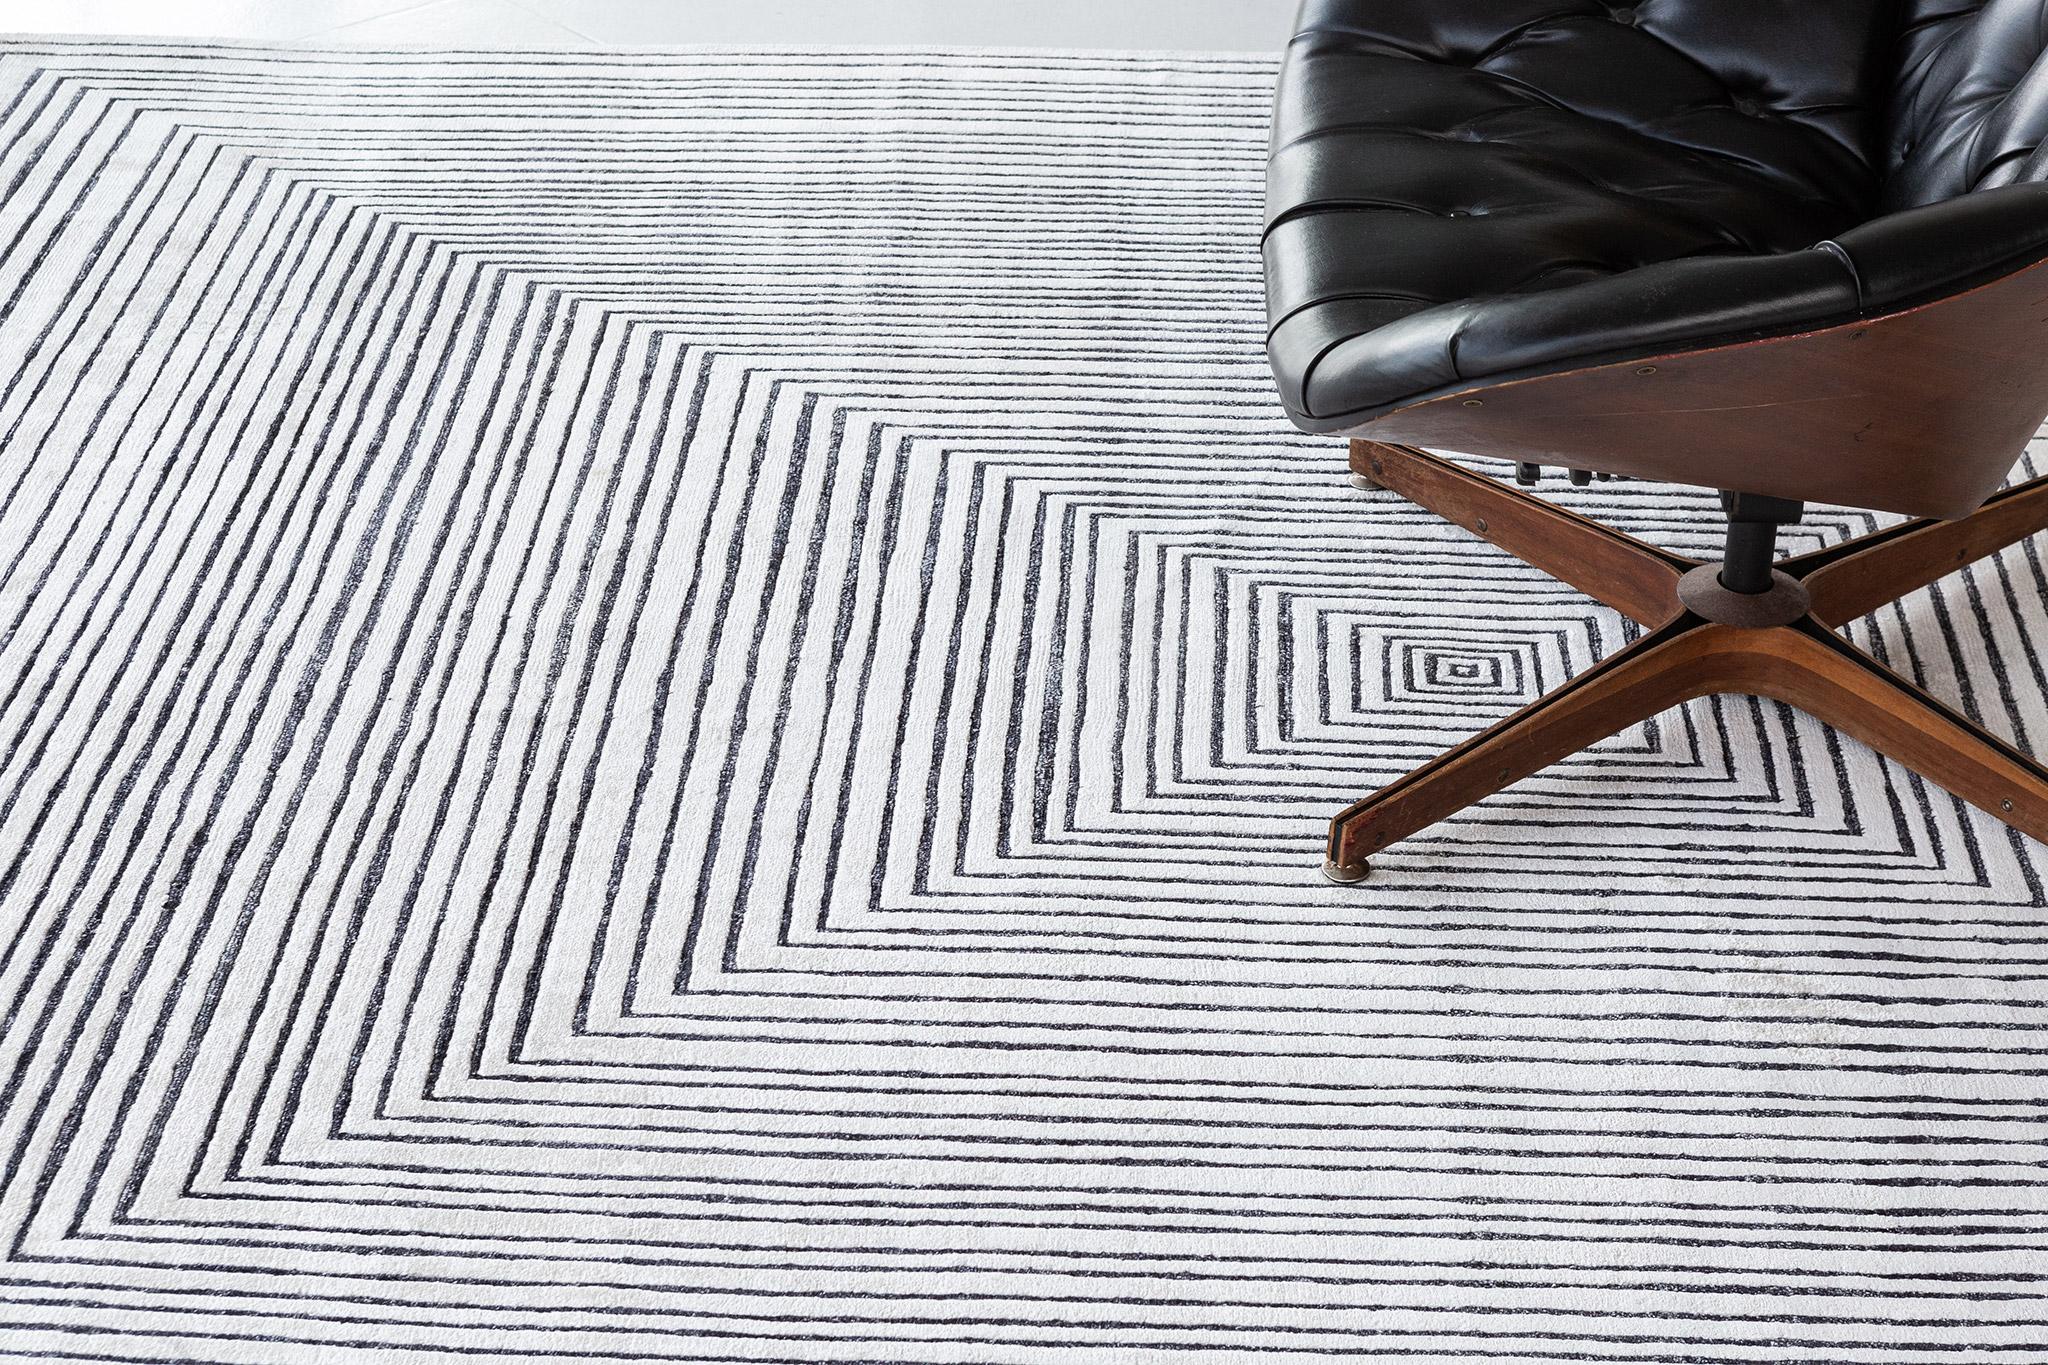 Masitawek is a bamboo silk rug that features an optical illusion of a rectilinear pattern. A contemporary and minimalist interior is a match for your modern room spaces. A centerpiece that will amaze your guests.

Rug Number
27582
Size
8' 1